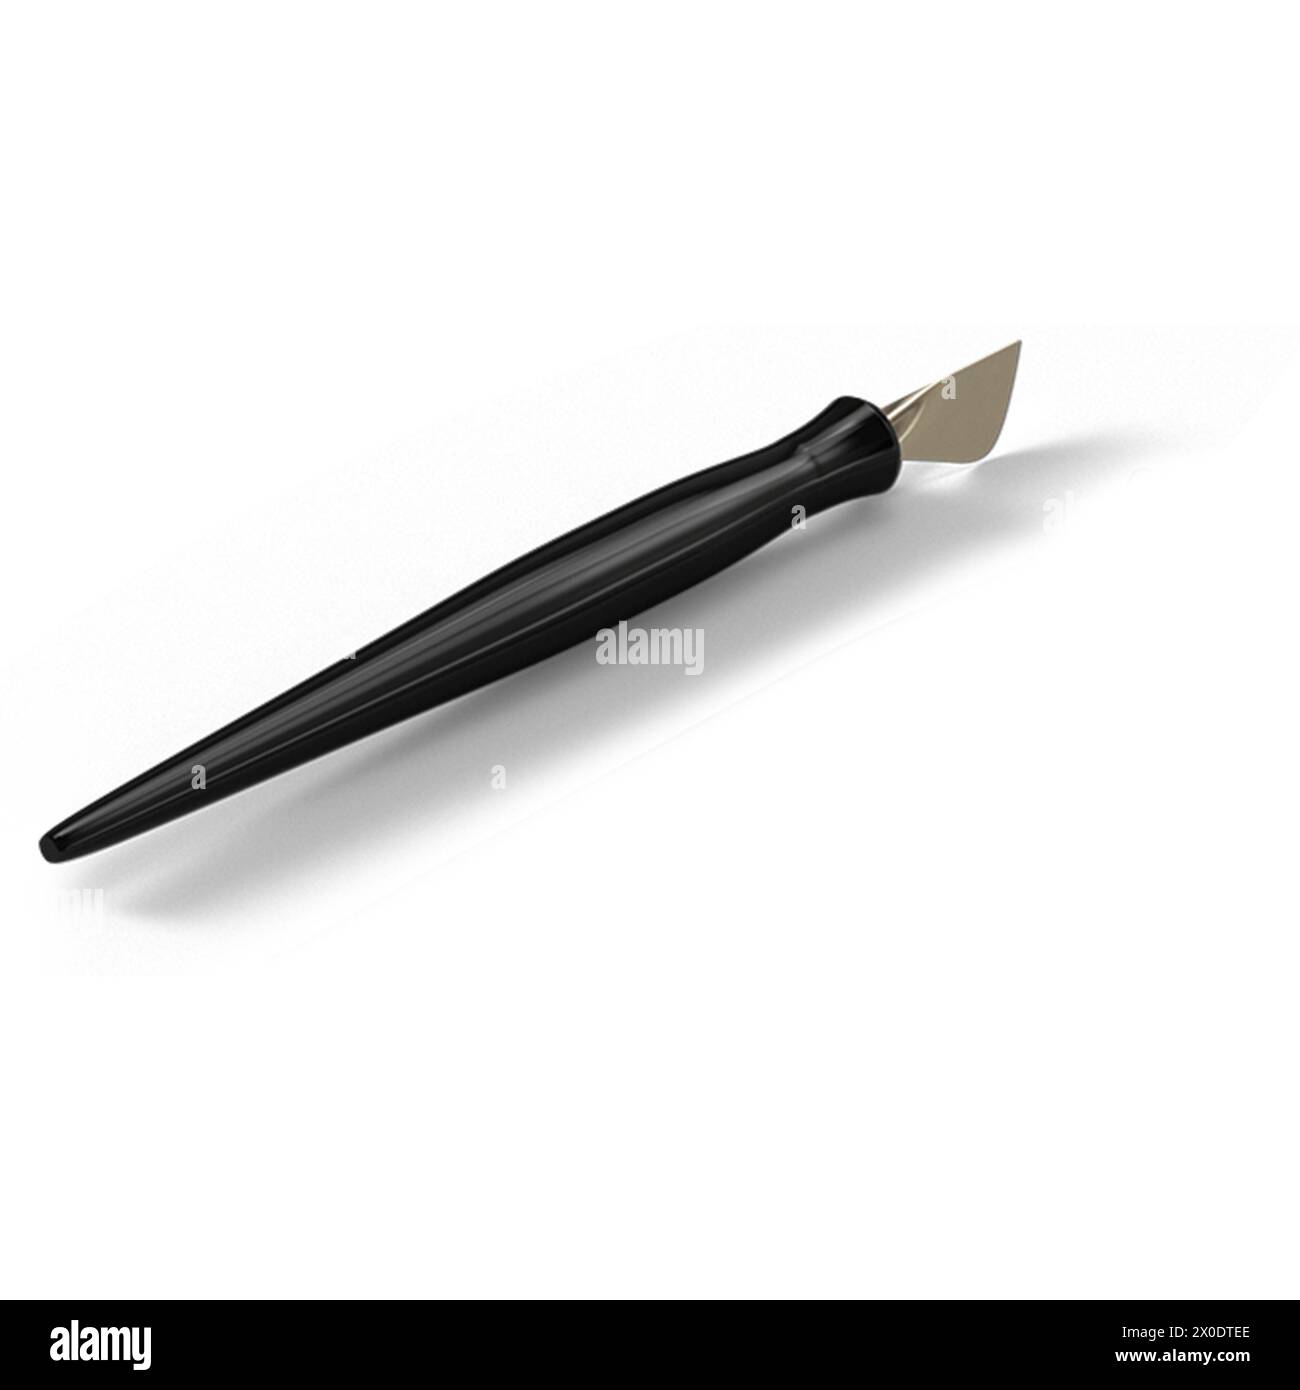 Creative concept isometric medic knife isolated against plain background , suitable for your asset elements. Stock Photo